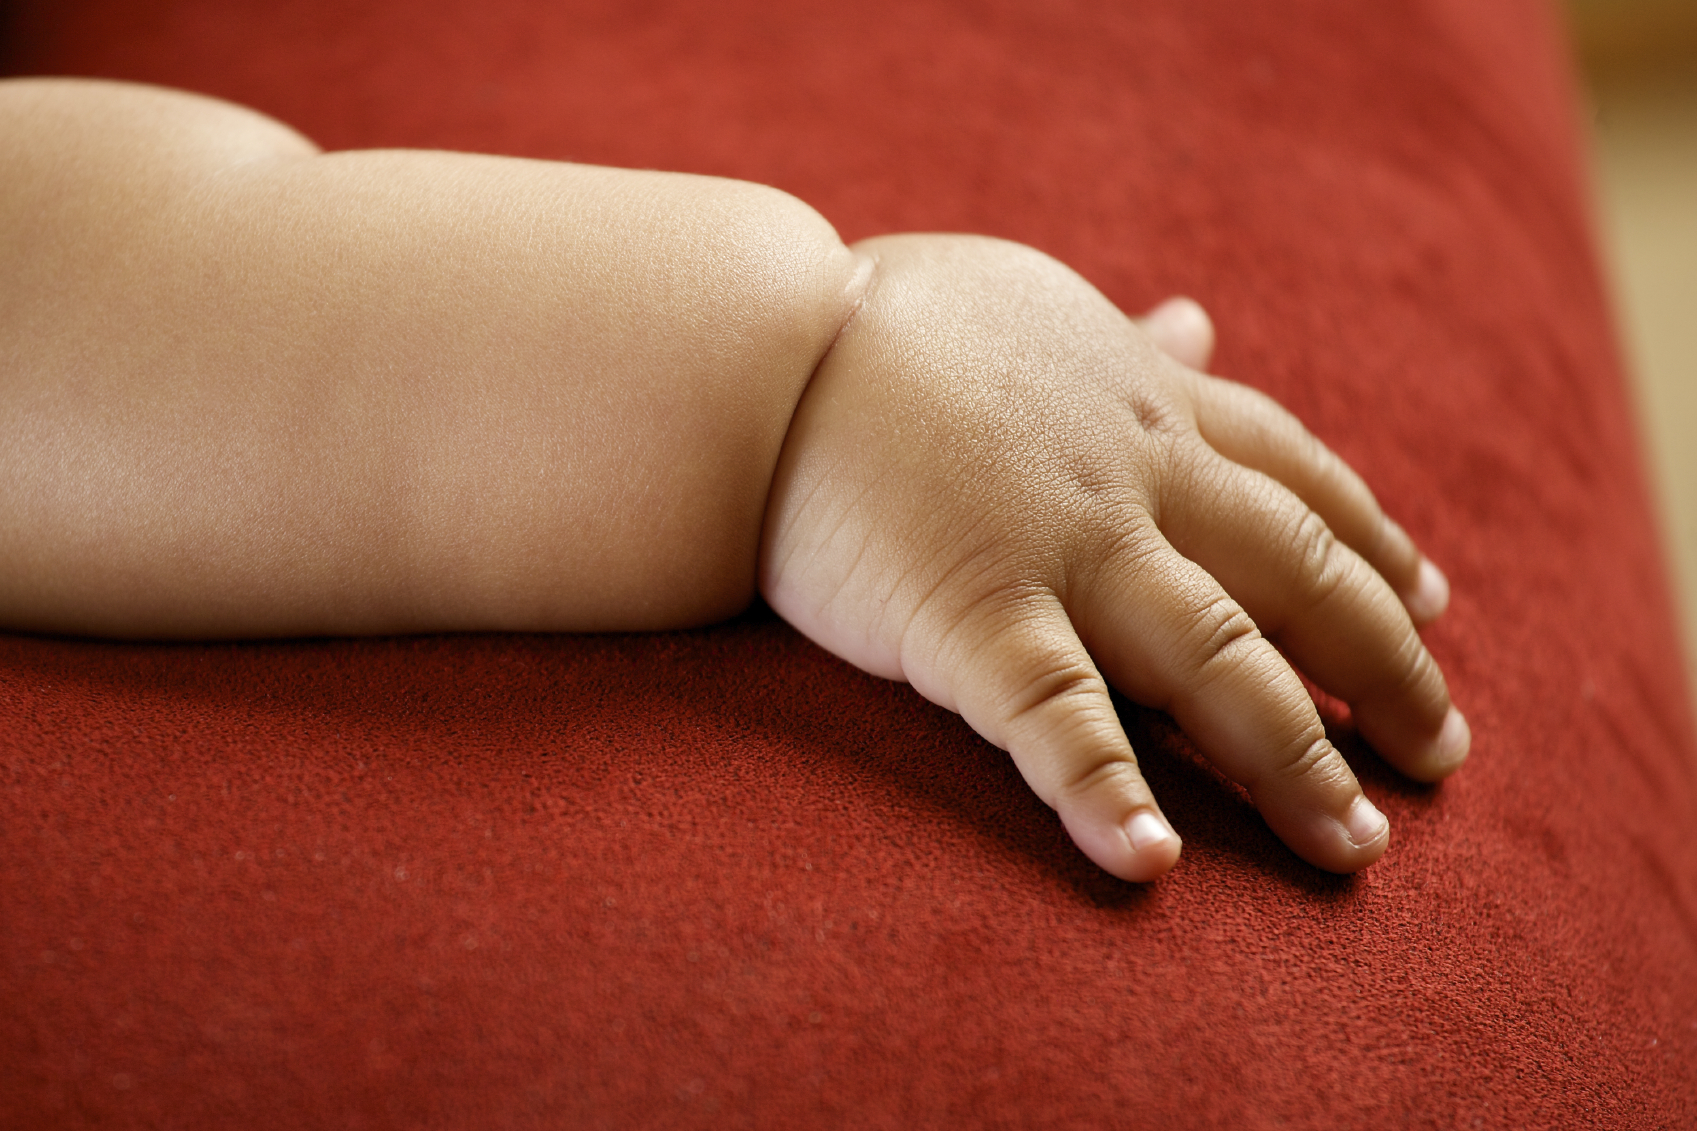 Children's hand isolated on red background